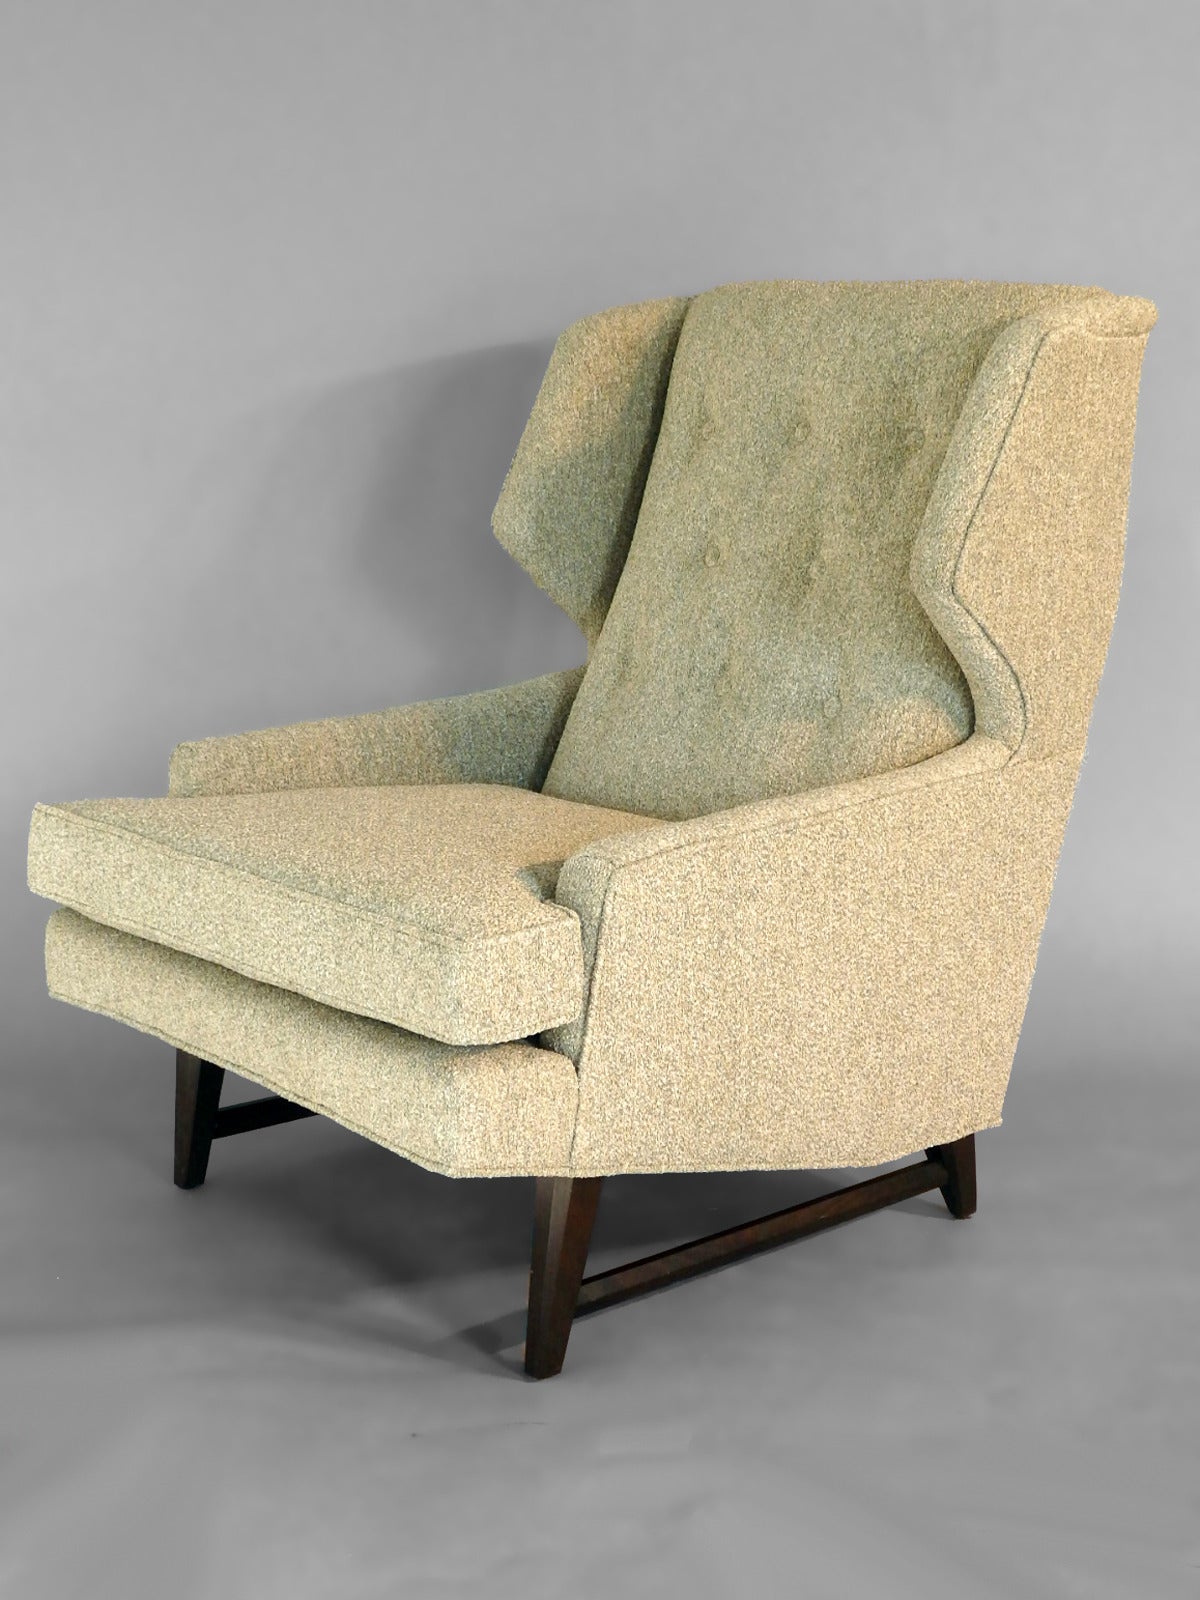 Wing chair in the style of Edward Wormley for Dunbar.